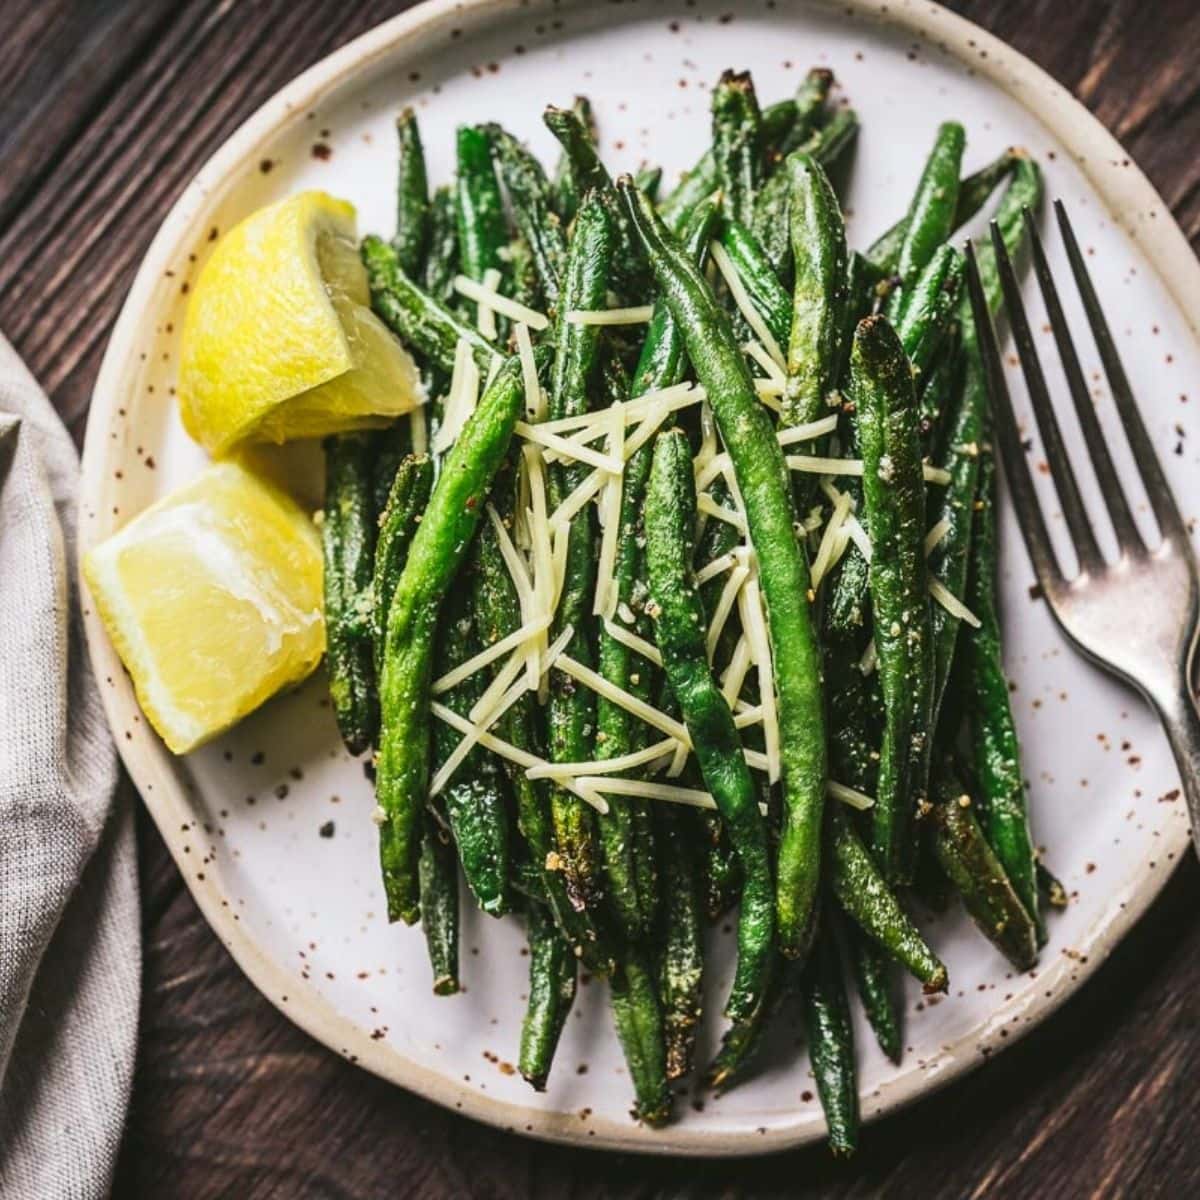 Air Fryer Frozen Green Beans - MOON and spoon and yum